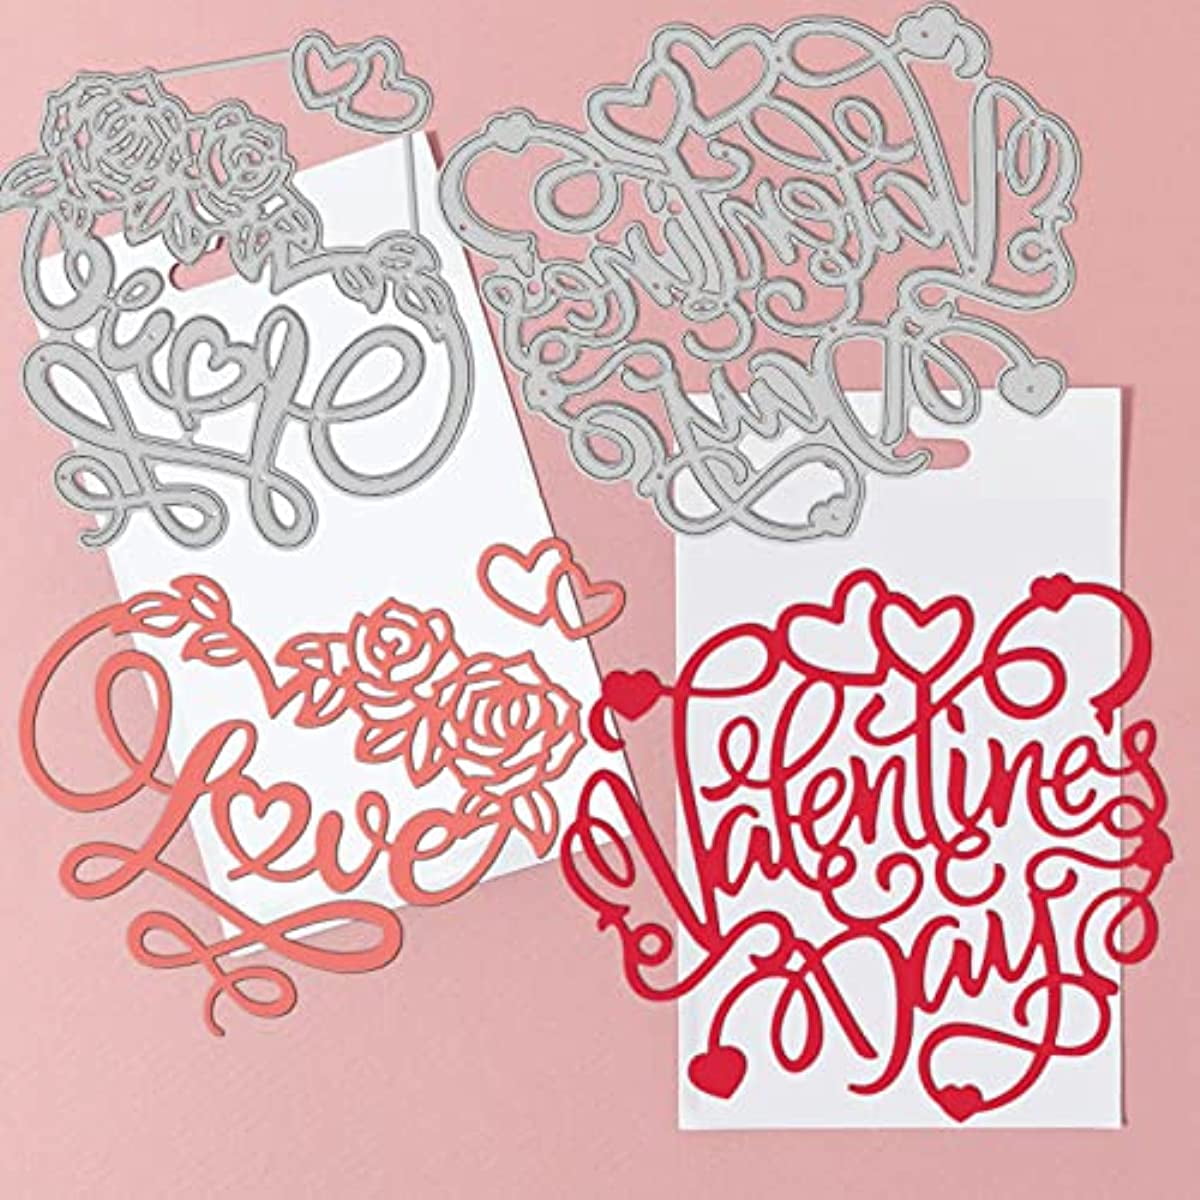 OIIKI 16 Pcs Valentine Hearts Die Cuts, 15 Pcs Heart Dialogues Stencils + 1Pcs Happy Valentines Day Stencils Cutting Dies DIY Crafts Gifts for